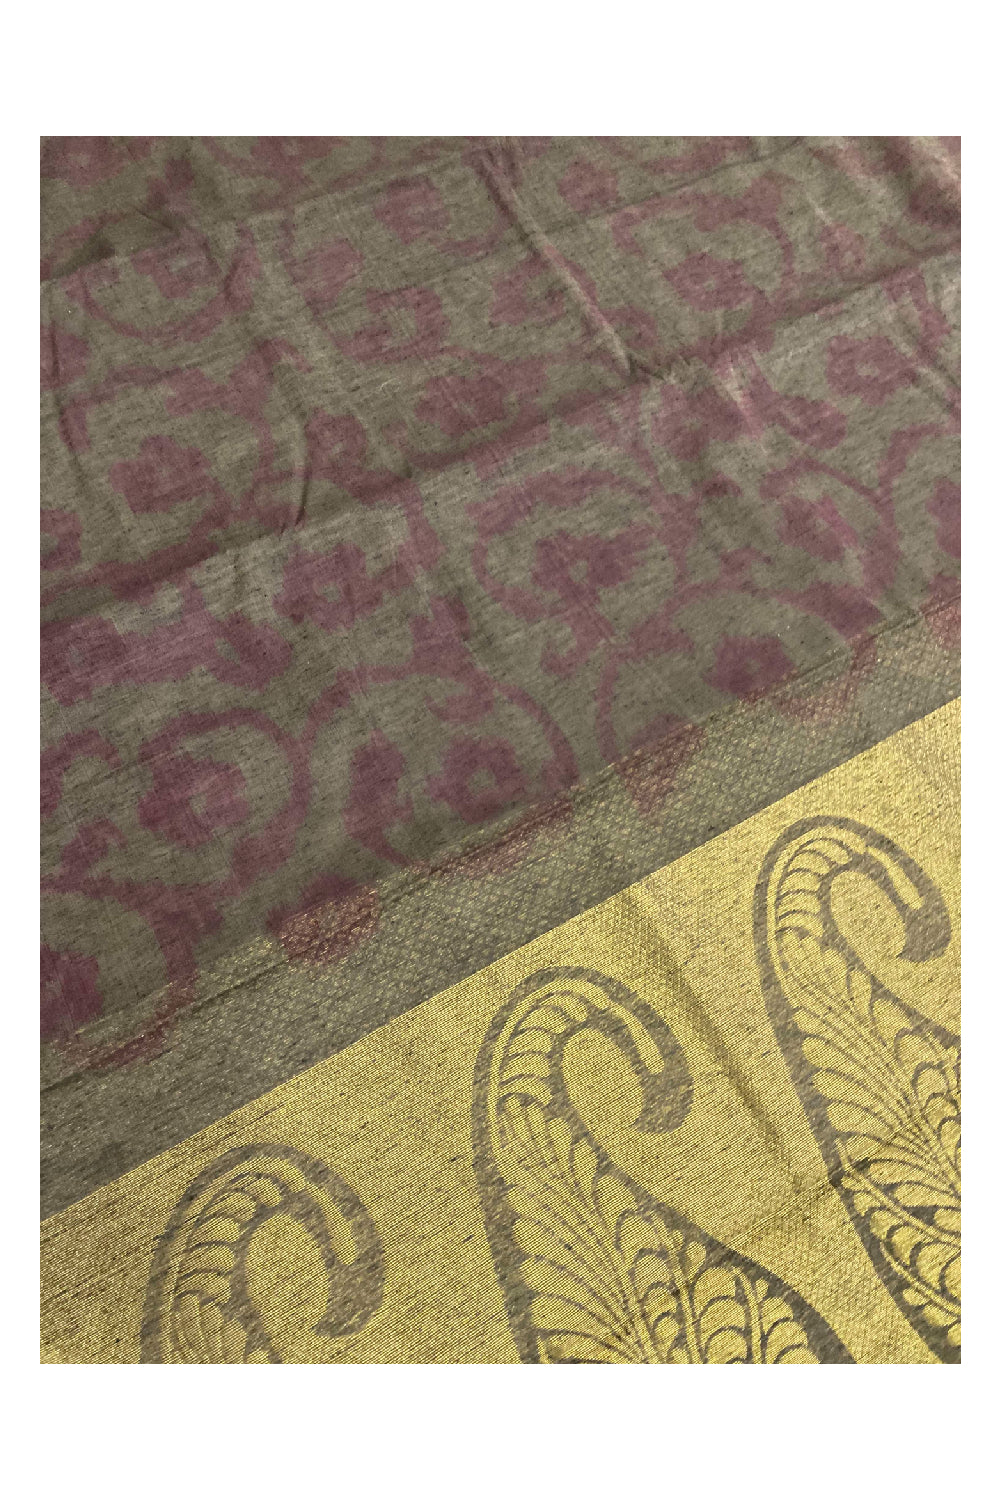 Southloom Sico Gadwal Semi Silk Saree in Purple with Beige Paisley Motifs (Blouse Piece with Work)